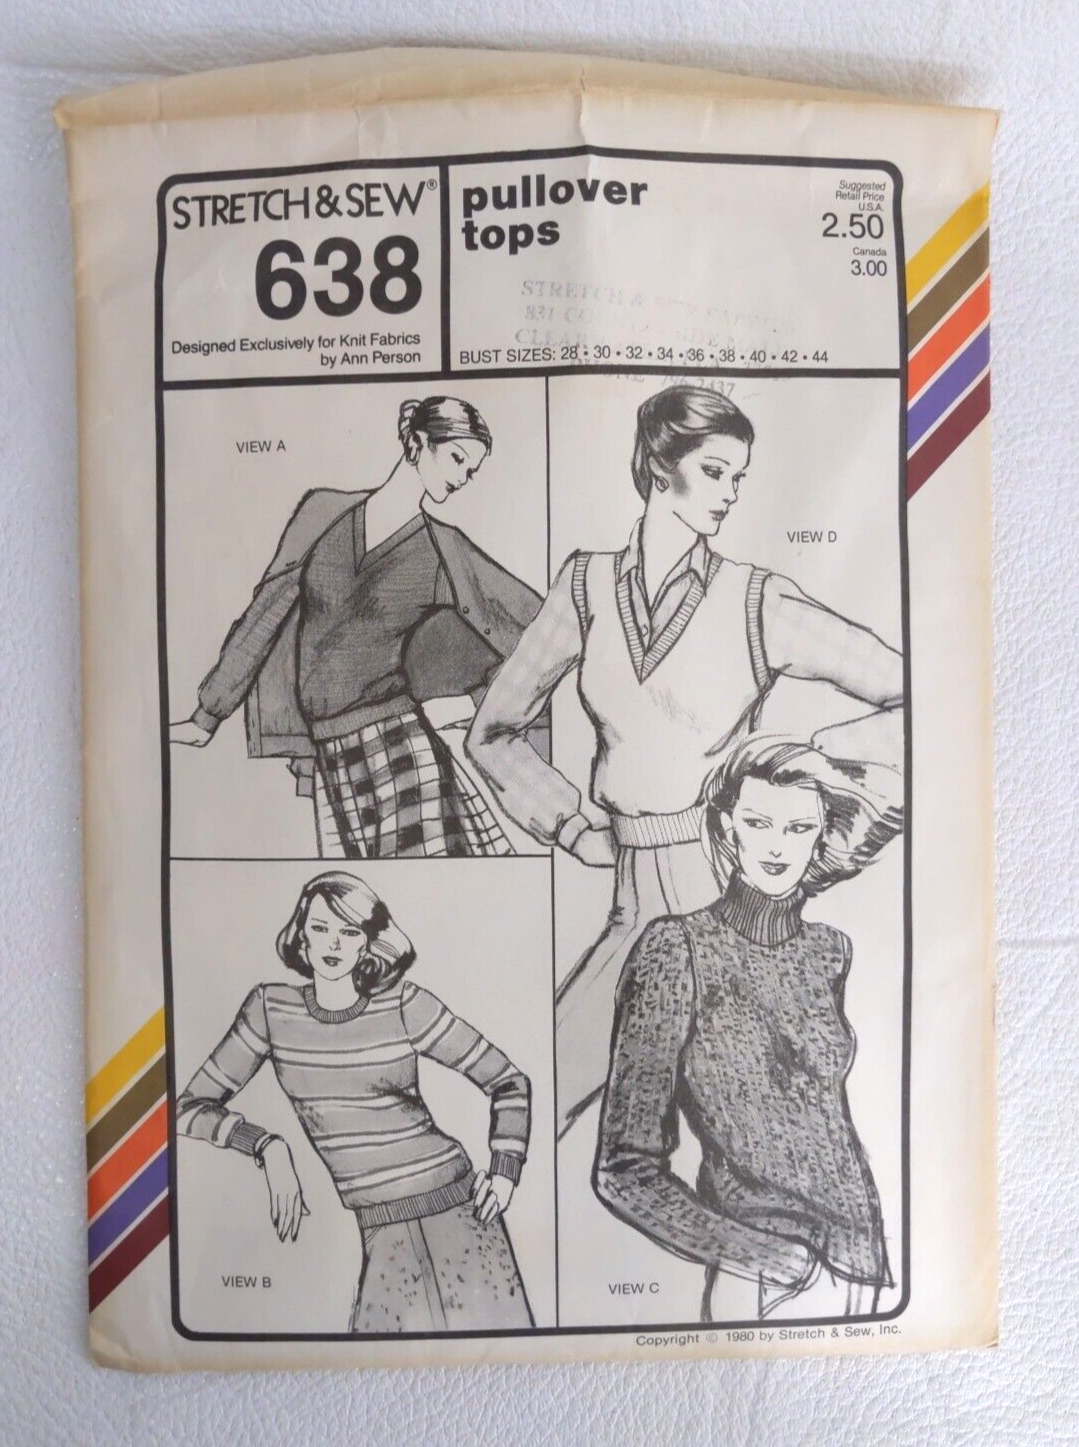 Primary image for Stretch & Sew #638 Uncut Sewing Pattern 1980 Pullover Tops Bust Sizes 28-44